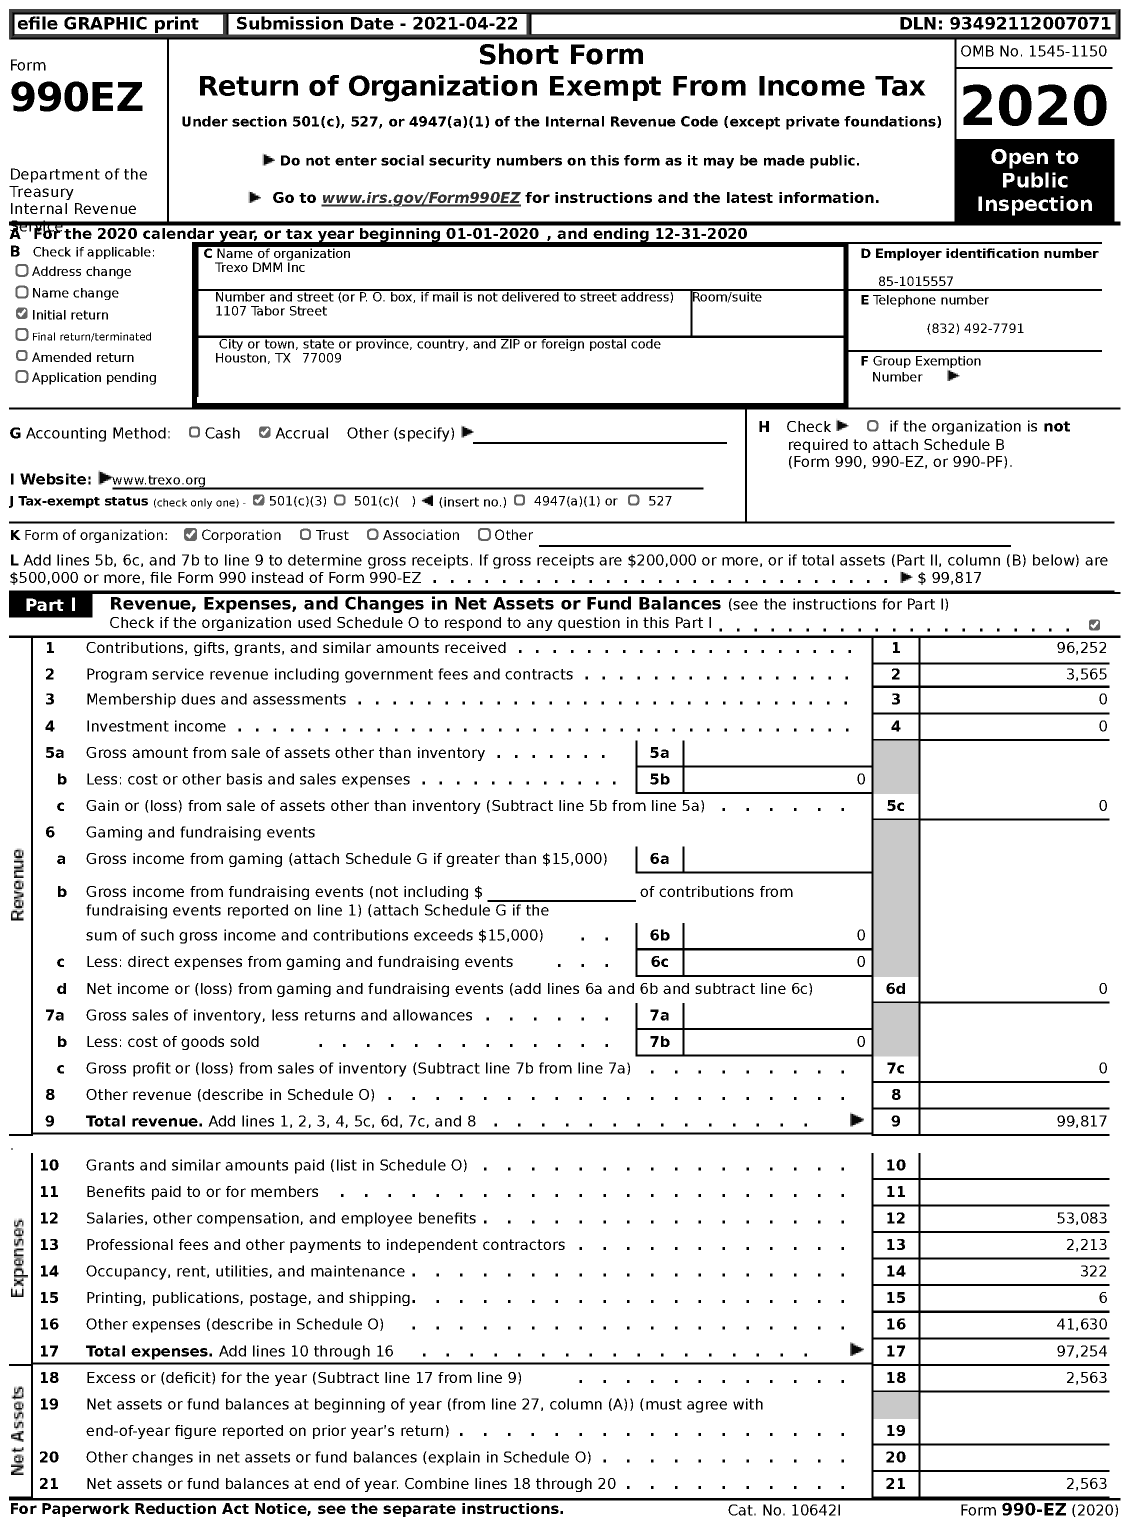 Image of first page of 2020 Form 990EZ for Trexo DMM